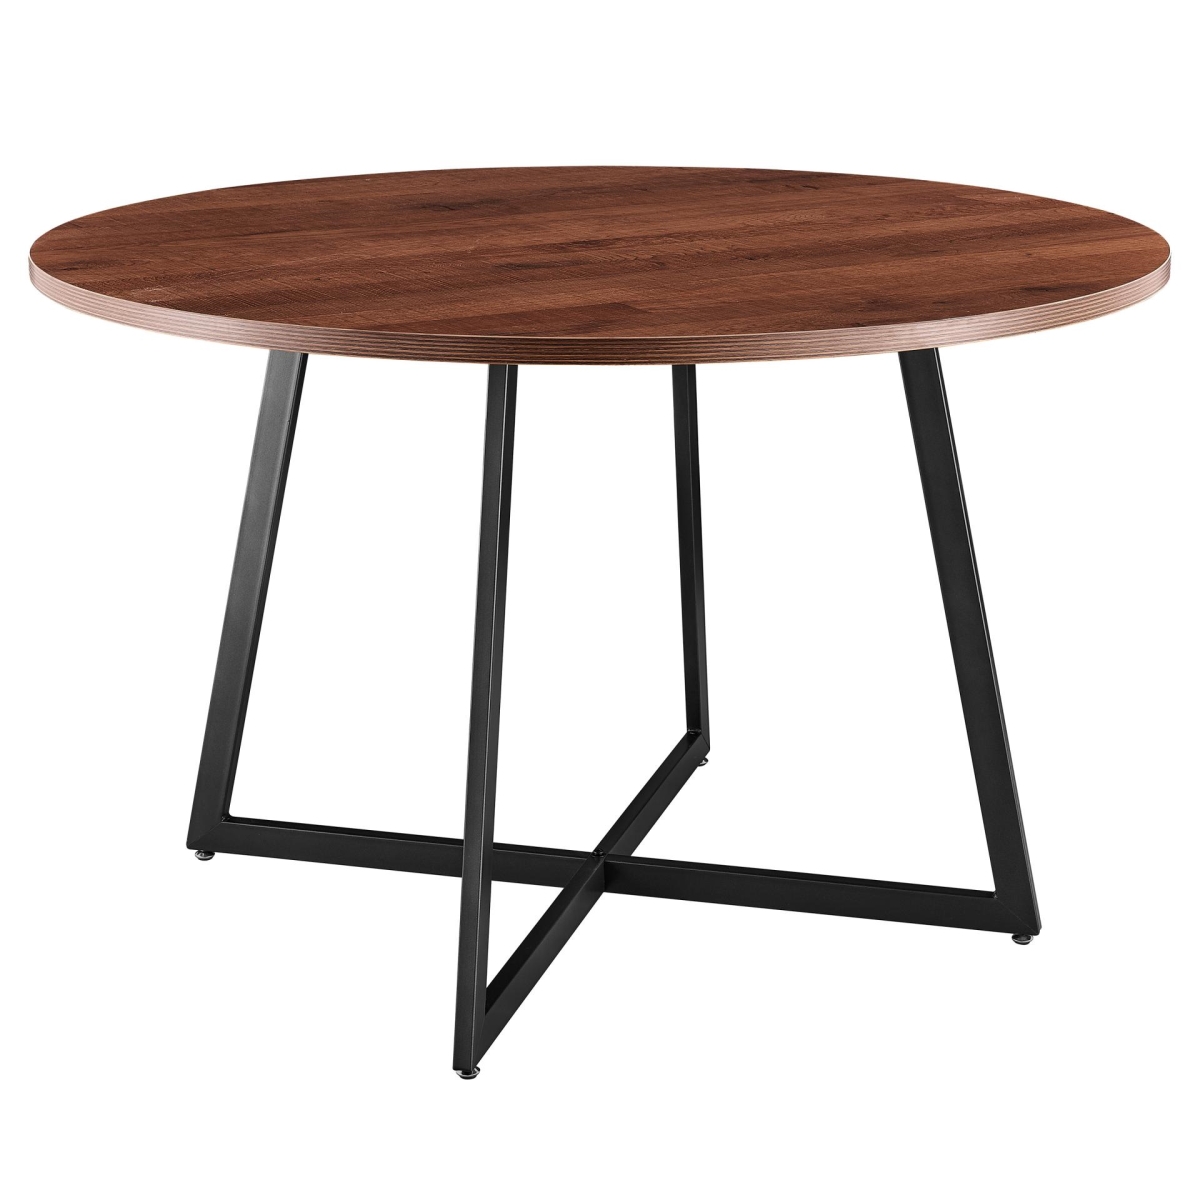 9300081-546 48 In. Courtdale Kd Round Table, Gliese Brown